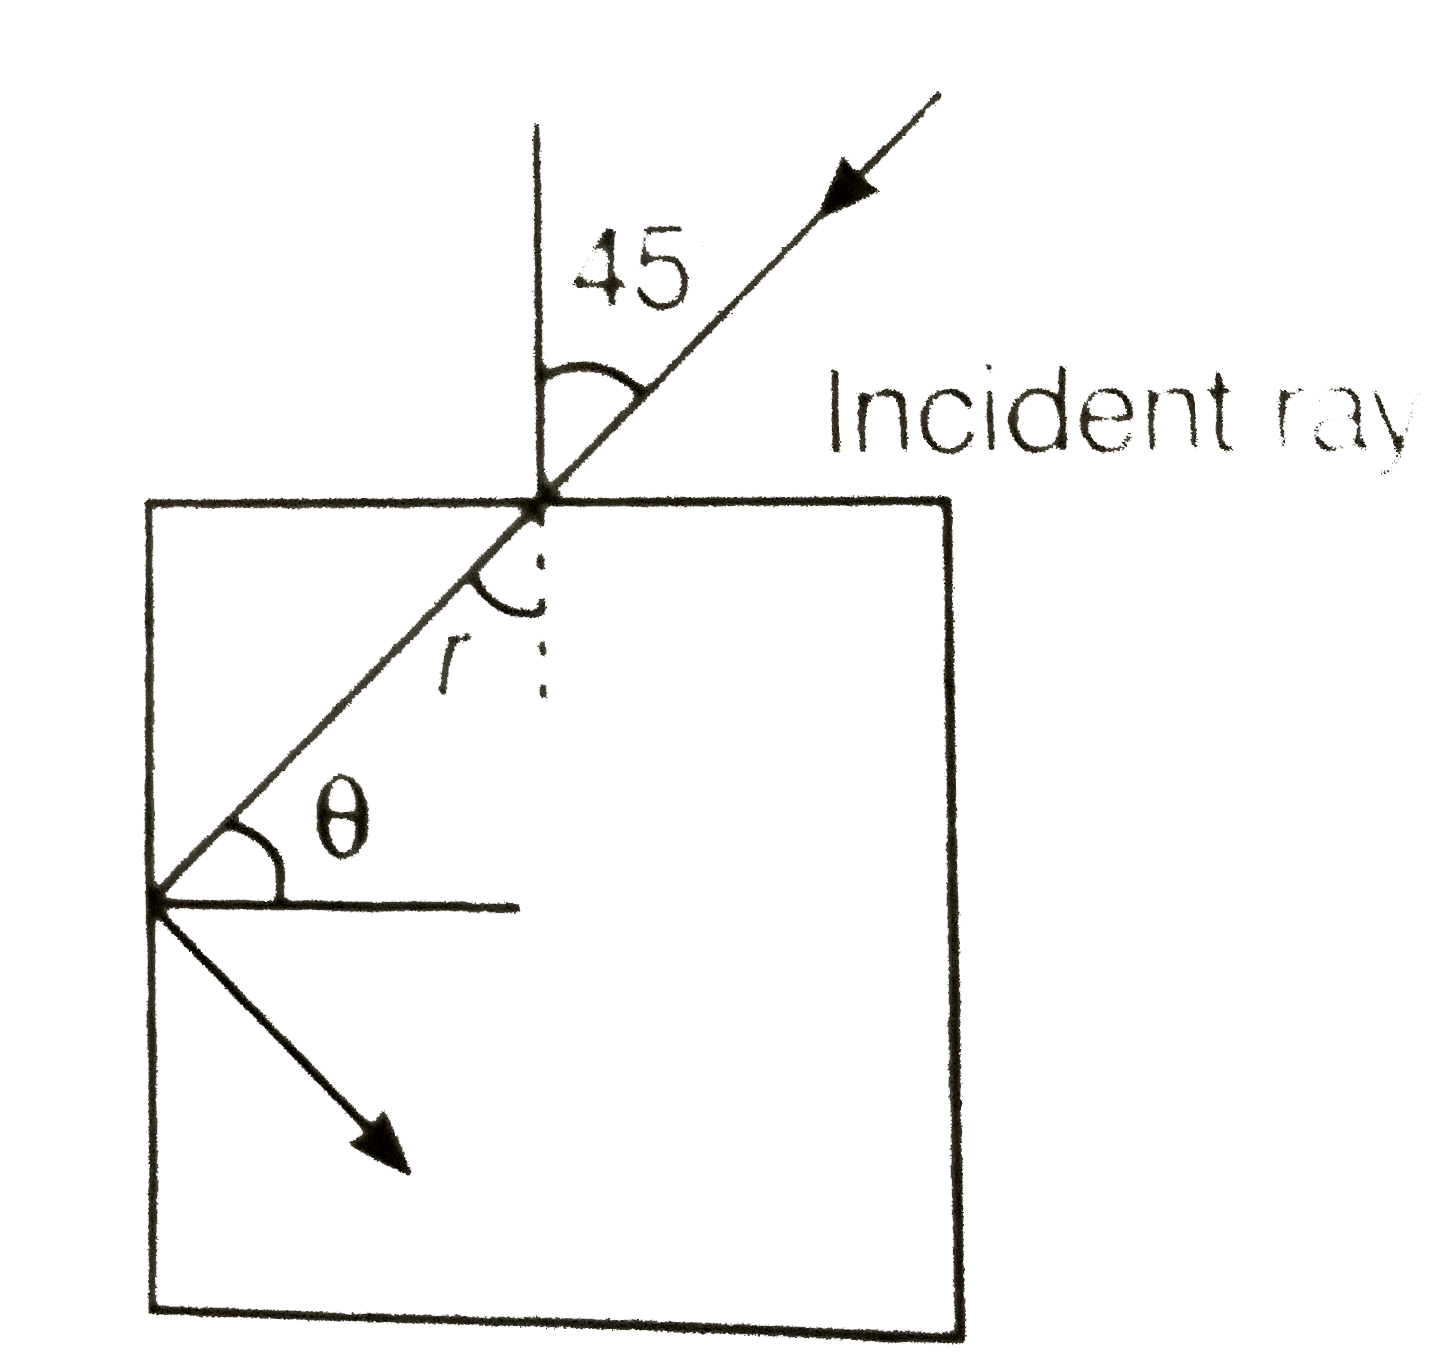 For the given incident ray as shown in figure, the condition of total internal reflection of the ray will be satisfied if the refractive indesx of block will be